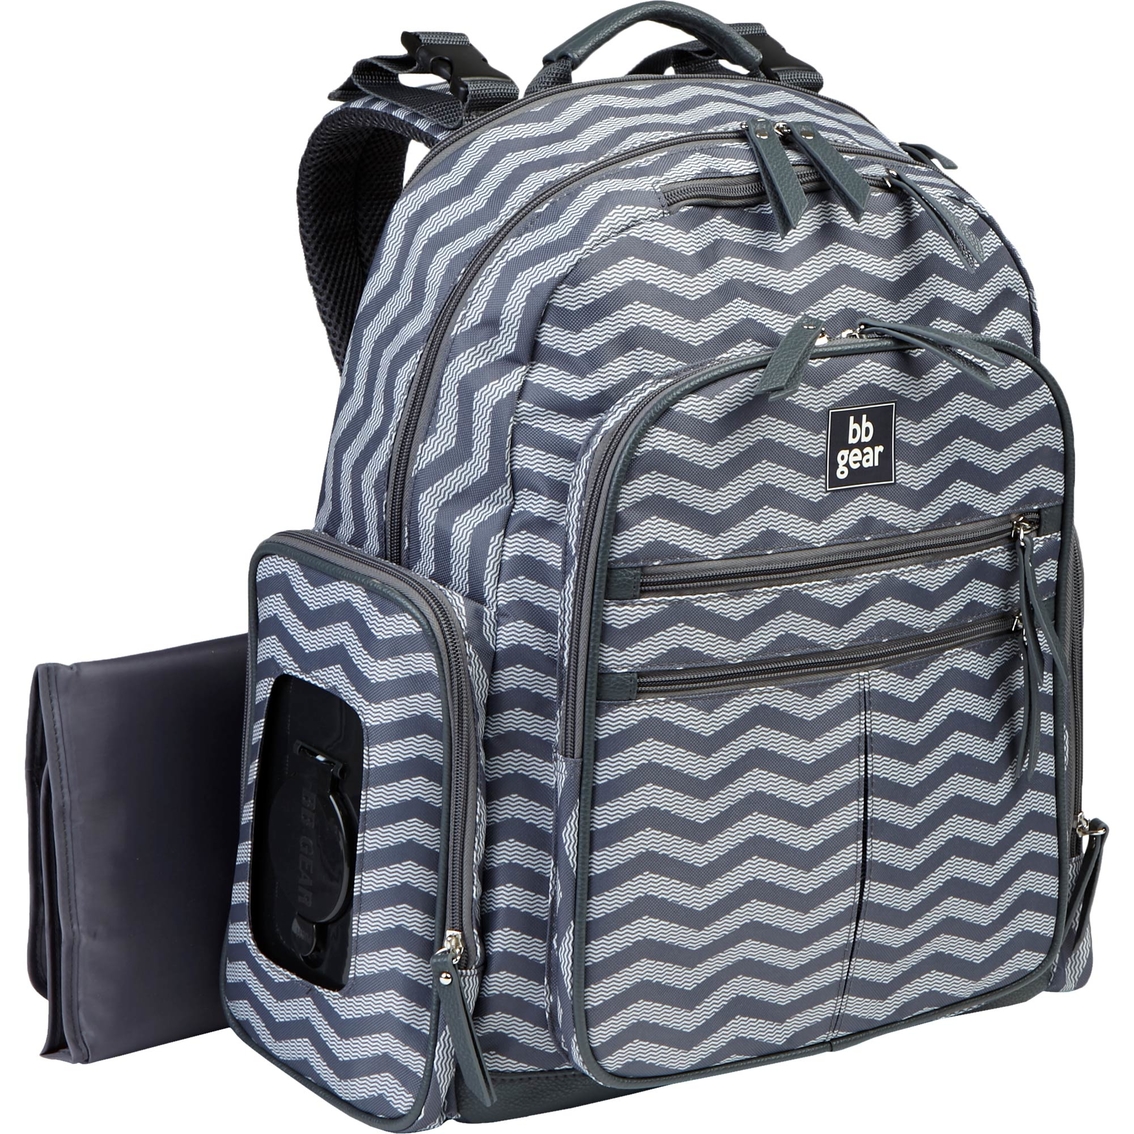 Baby Boom Gear Chevron Print Places And Spaces Backpack Diaper Bag | Diaper Bags & Accessories ...